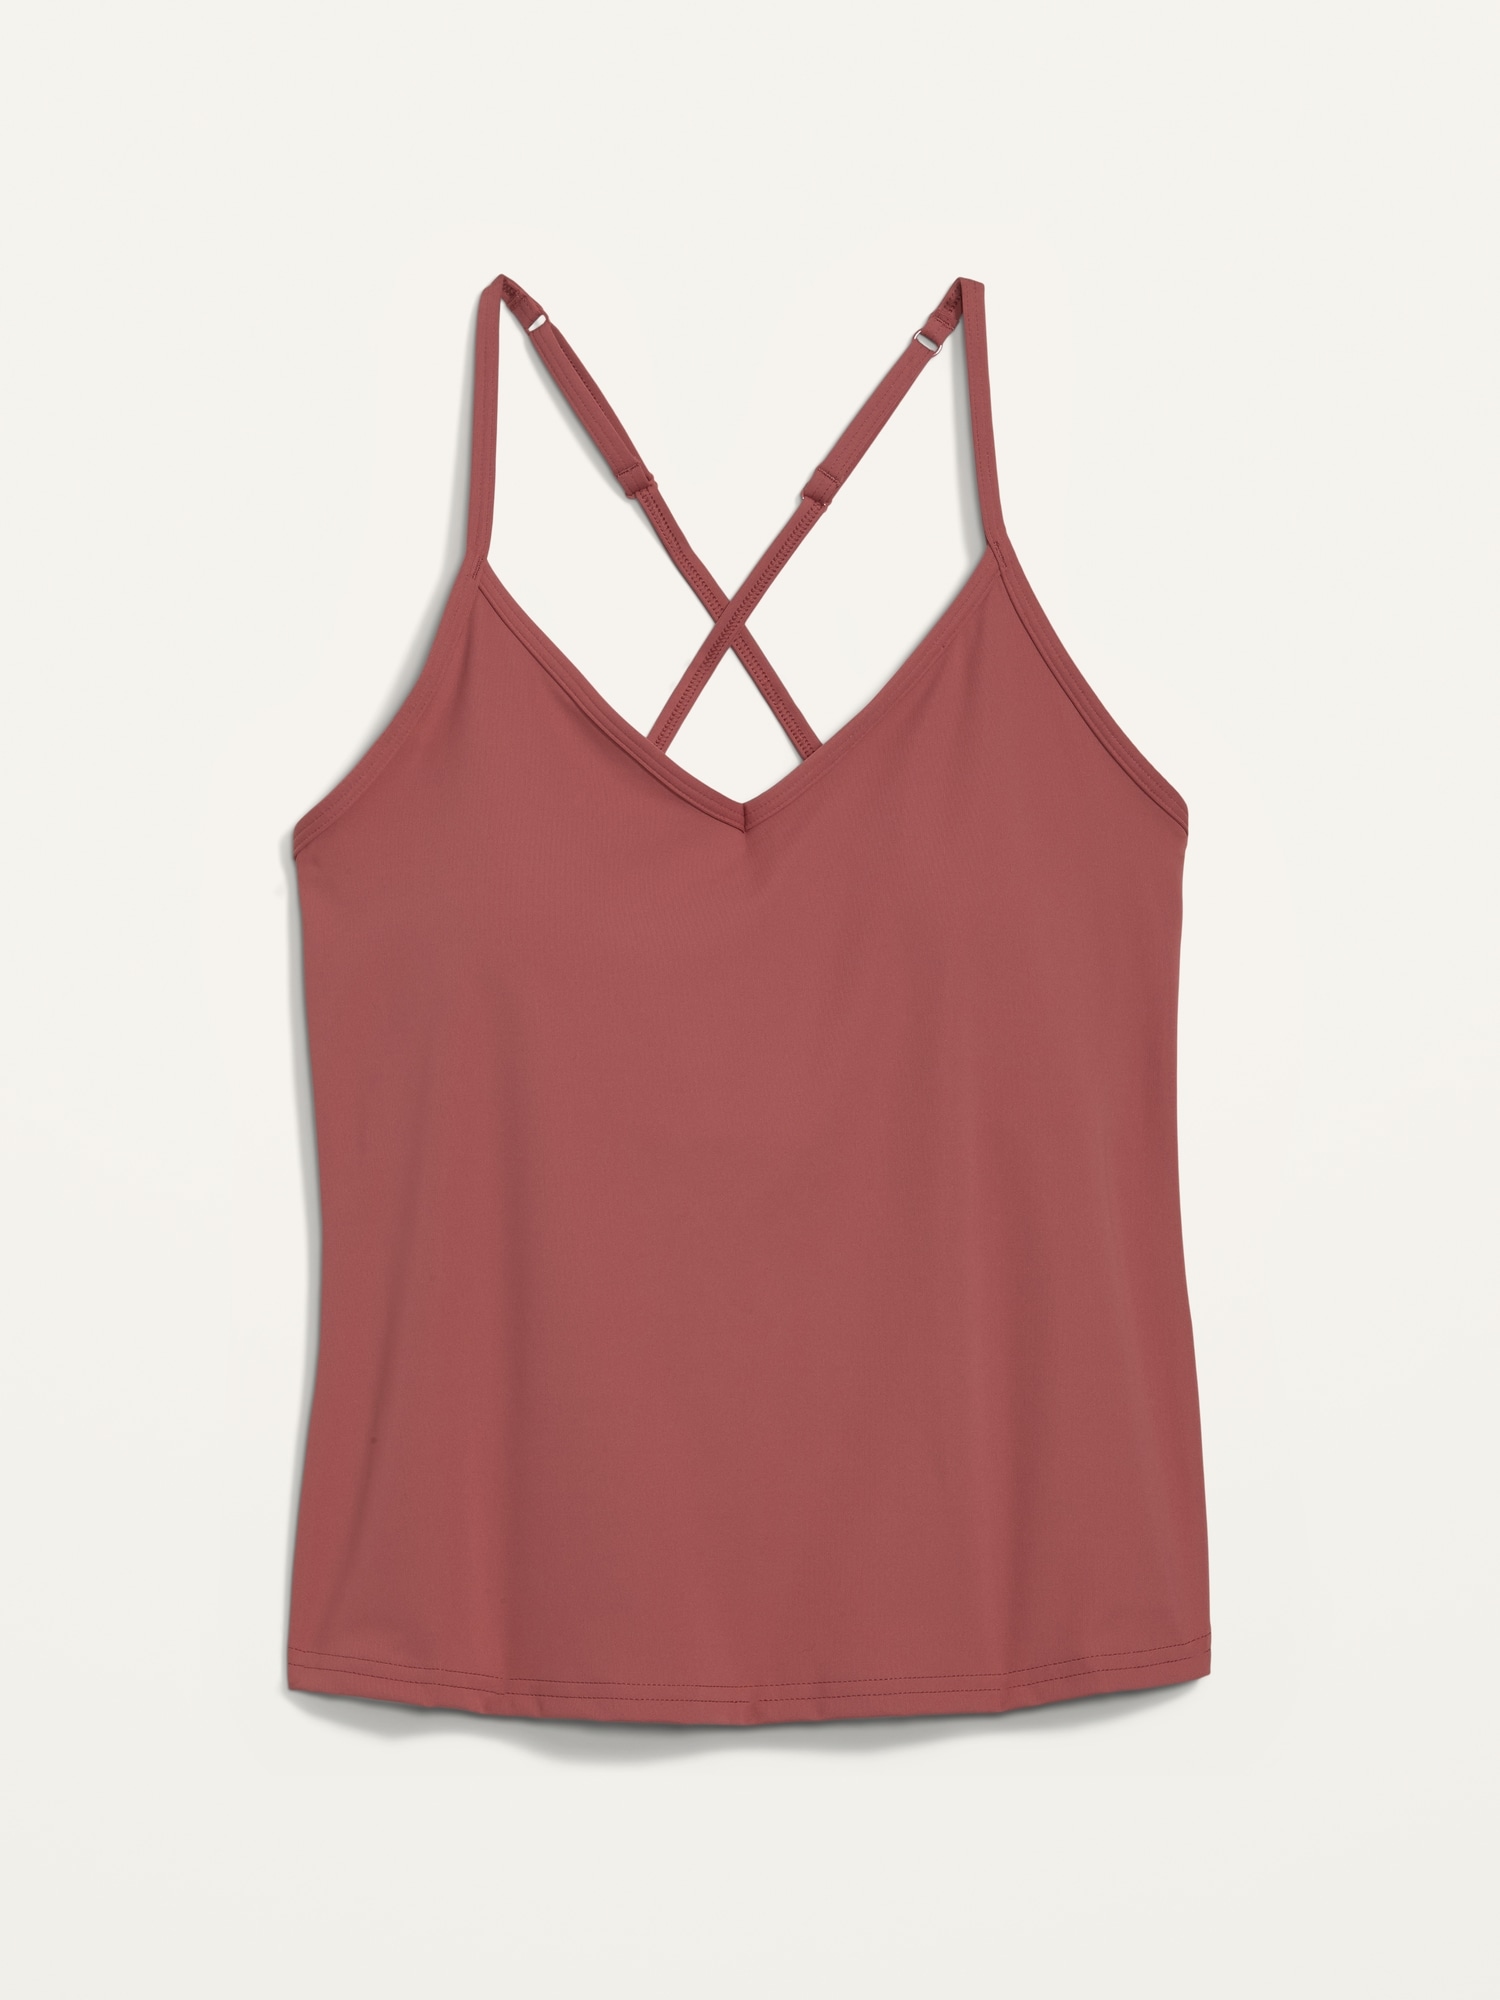 Old Navy Active Powersoft Metallic Purple Crop Tank Top Built in Bra Size XL  - $16 - From Kayla